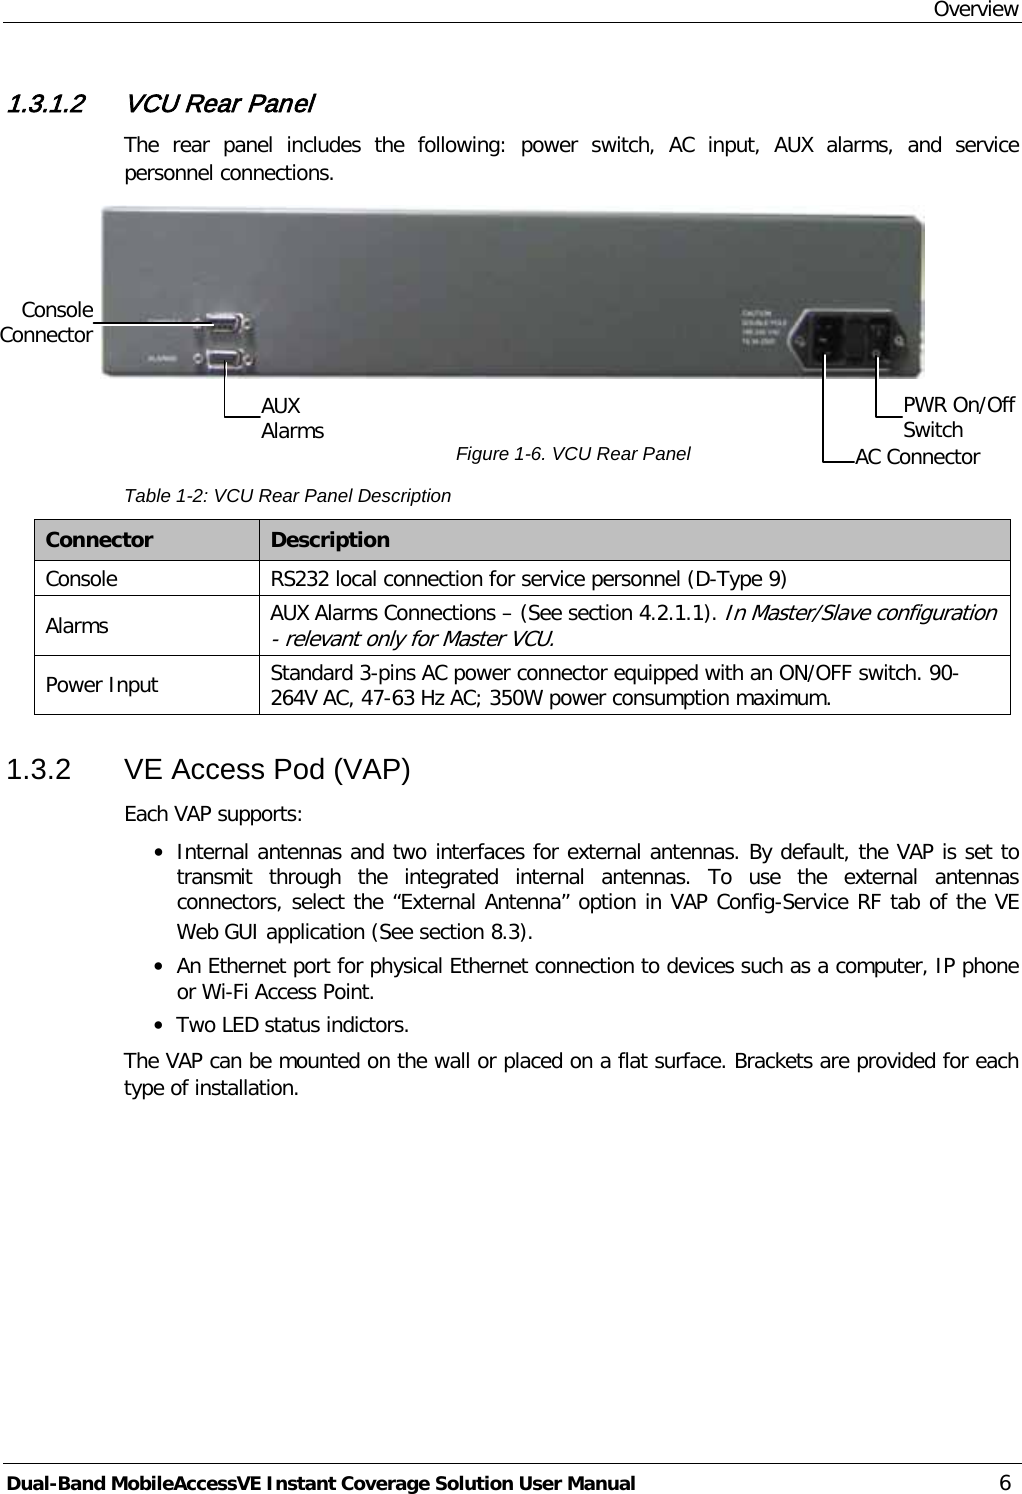 Overview Dual-Band MobileAccessVE Instant Coverage Solution User Manual 6 1.3.1.2 VCU Rear Panel The rear panel includes the following:  power  switch,  AC  input, AUX alarms,  and service personnel connections.   Figure  1-6. VCU Rear Panel Table  1-2: VCU Rear Panel Description Connector Description Console RS232 local connection for service personnel (D-Type 9) Alarms  AUX Alarms Connections – (See section  4.2.1.1). In Master/Slave configuration - relevant only for Master VCU. Power Input Standard 3-pins AC power connector equipped with an ON/OFF switch. 90-264V AC, 47-63 Hz AC; 350W power consumption maximum. 1.3.2  VE Access Pod (VAP) Each VAP supports: · Internal antennas and two interfaces for external antennas. By default, the VAP is set to transmit through the integrated internal antennas. To use the external antennas connectors, select the “External Antenna” option in VAP Config-Service RF tab of the VE Web GUI application (See section  8.3). · An Ethernet port for physical Ethernet connection to devices such as a computer, IP phone or Wi-Fi Access Point. · Two LED status indictors. The VAP can be mounted on the wall or placed on a flat surface. Brackets are provided for each type of installation.   PWR On/Off Switch AC Connector AUX Alarms Console Connector 